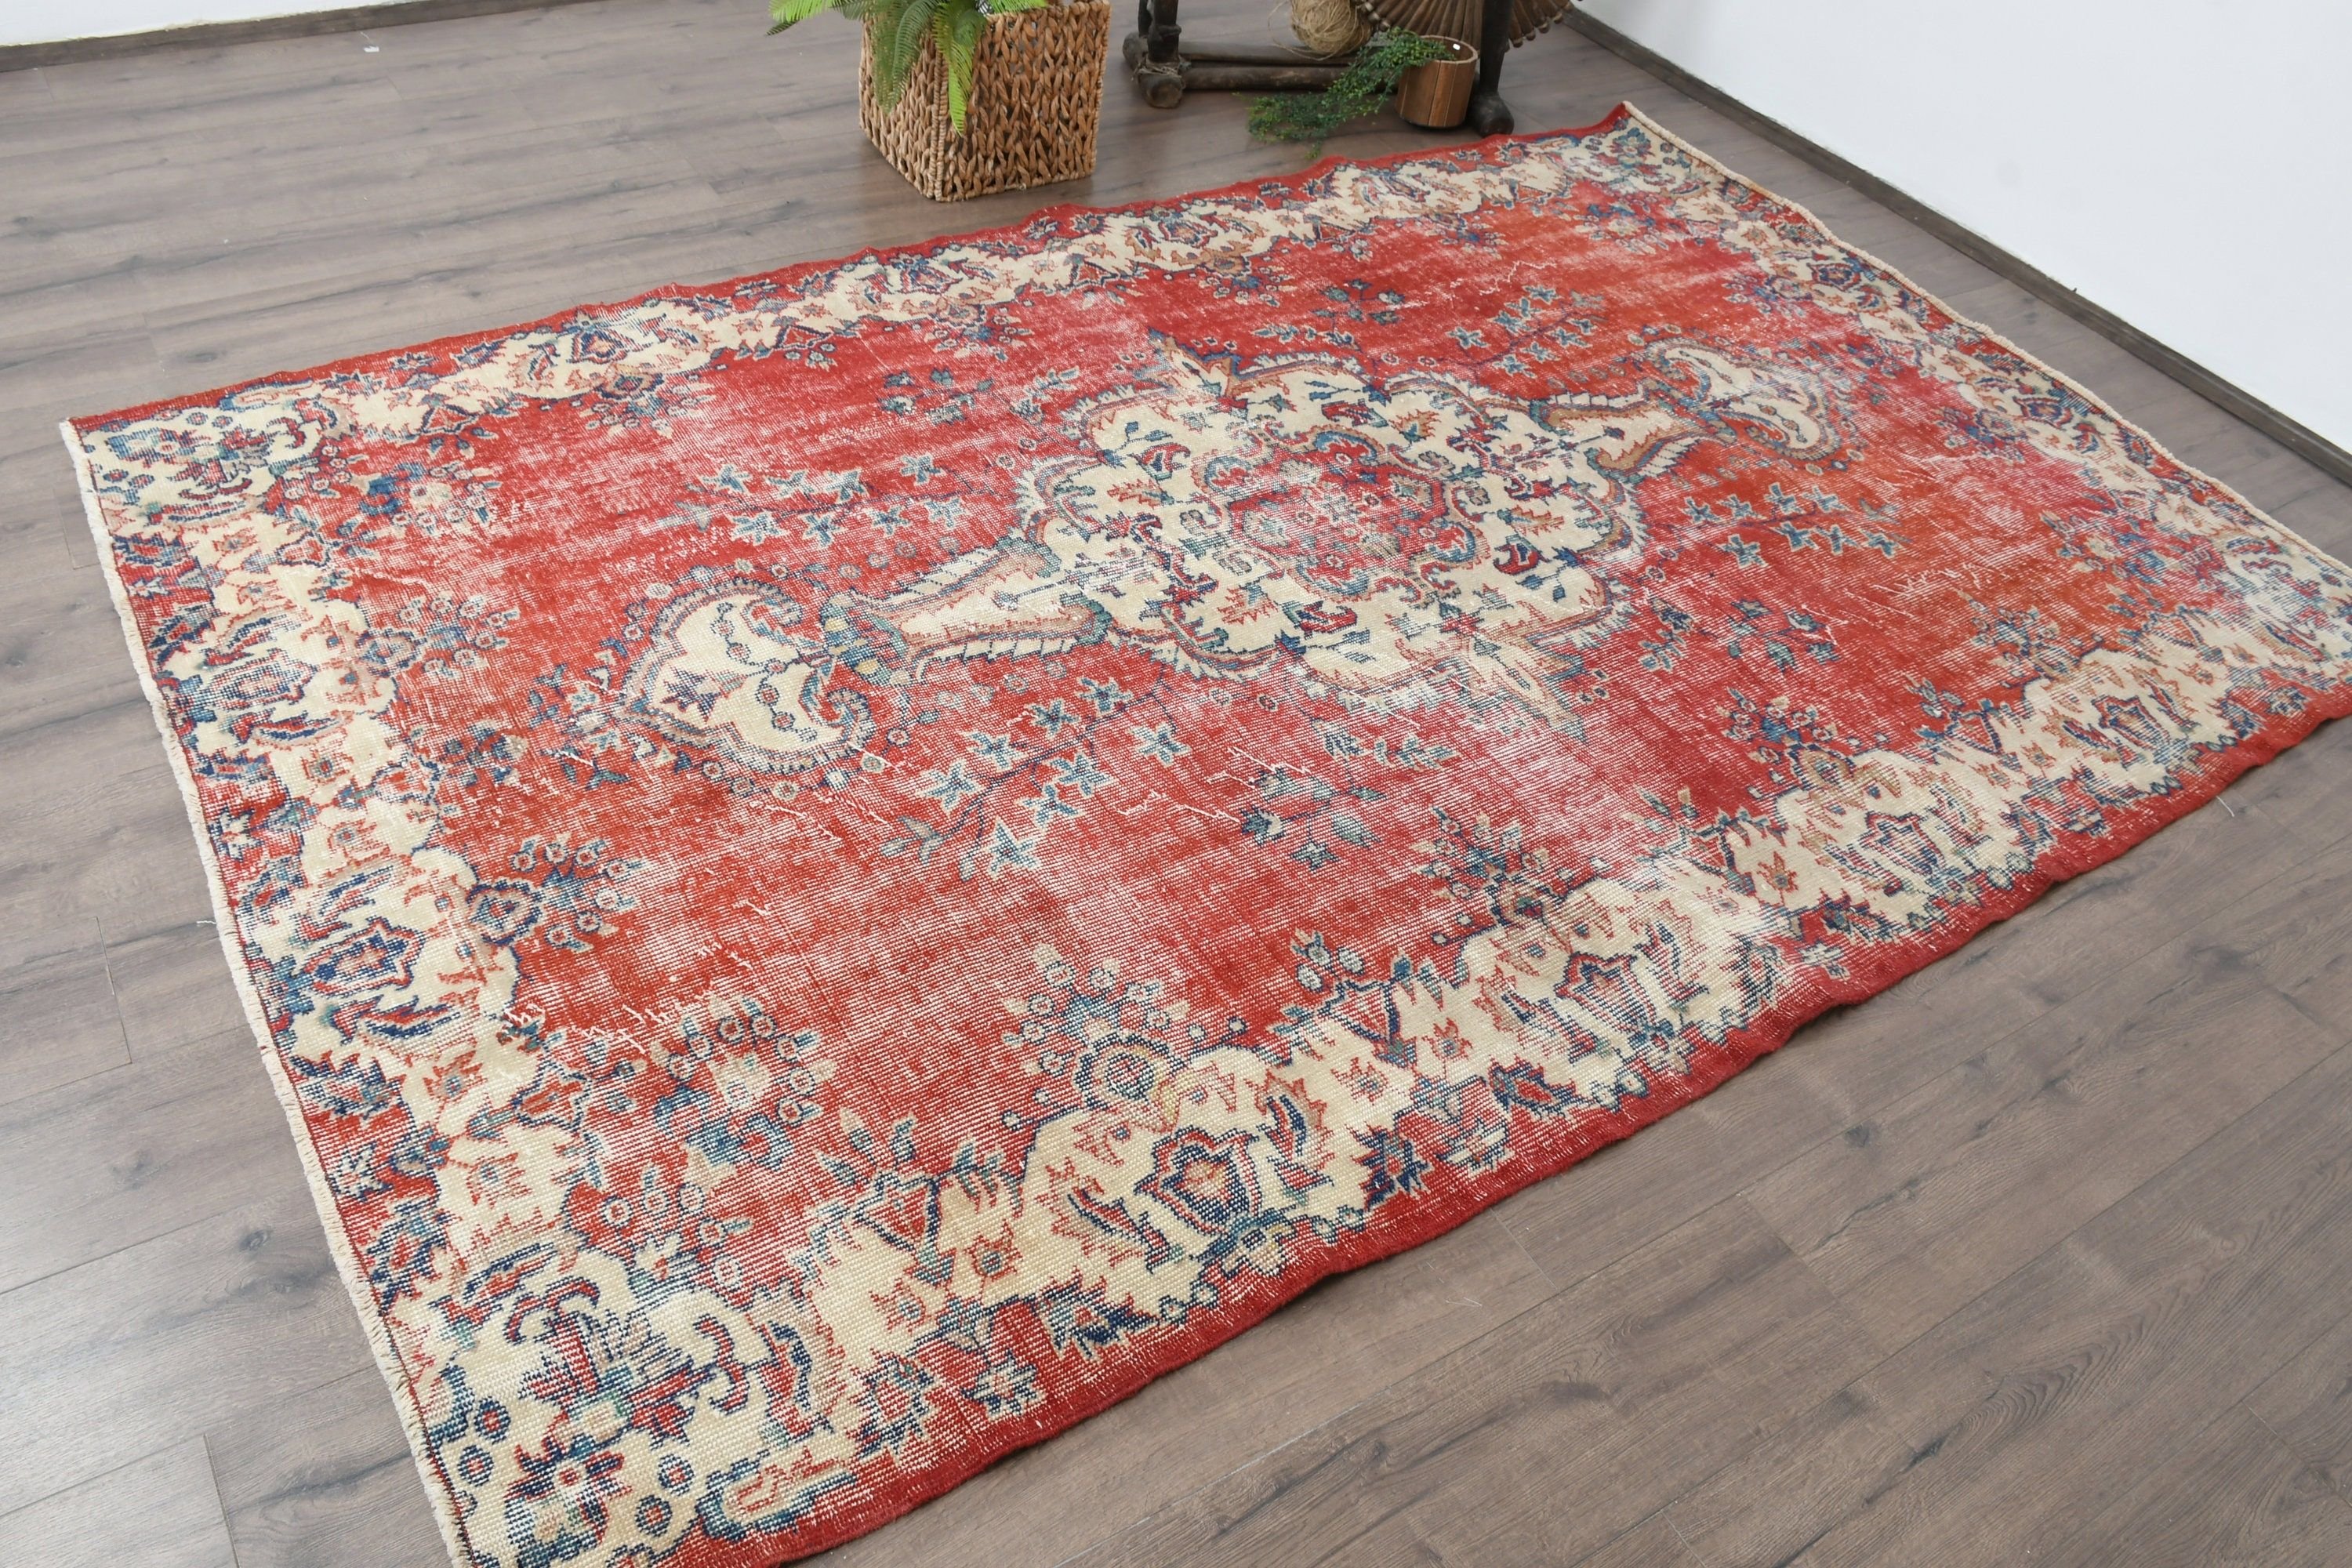 Red Moroccan Rugs, Turkish Rugs, Rugs for Salon, Living Room Rug, Vintage Rugs, Home Decor Rug, 5.8x9.1 ft Large Rugs, Old Rug, Bedroom Rug